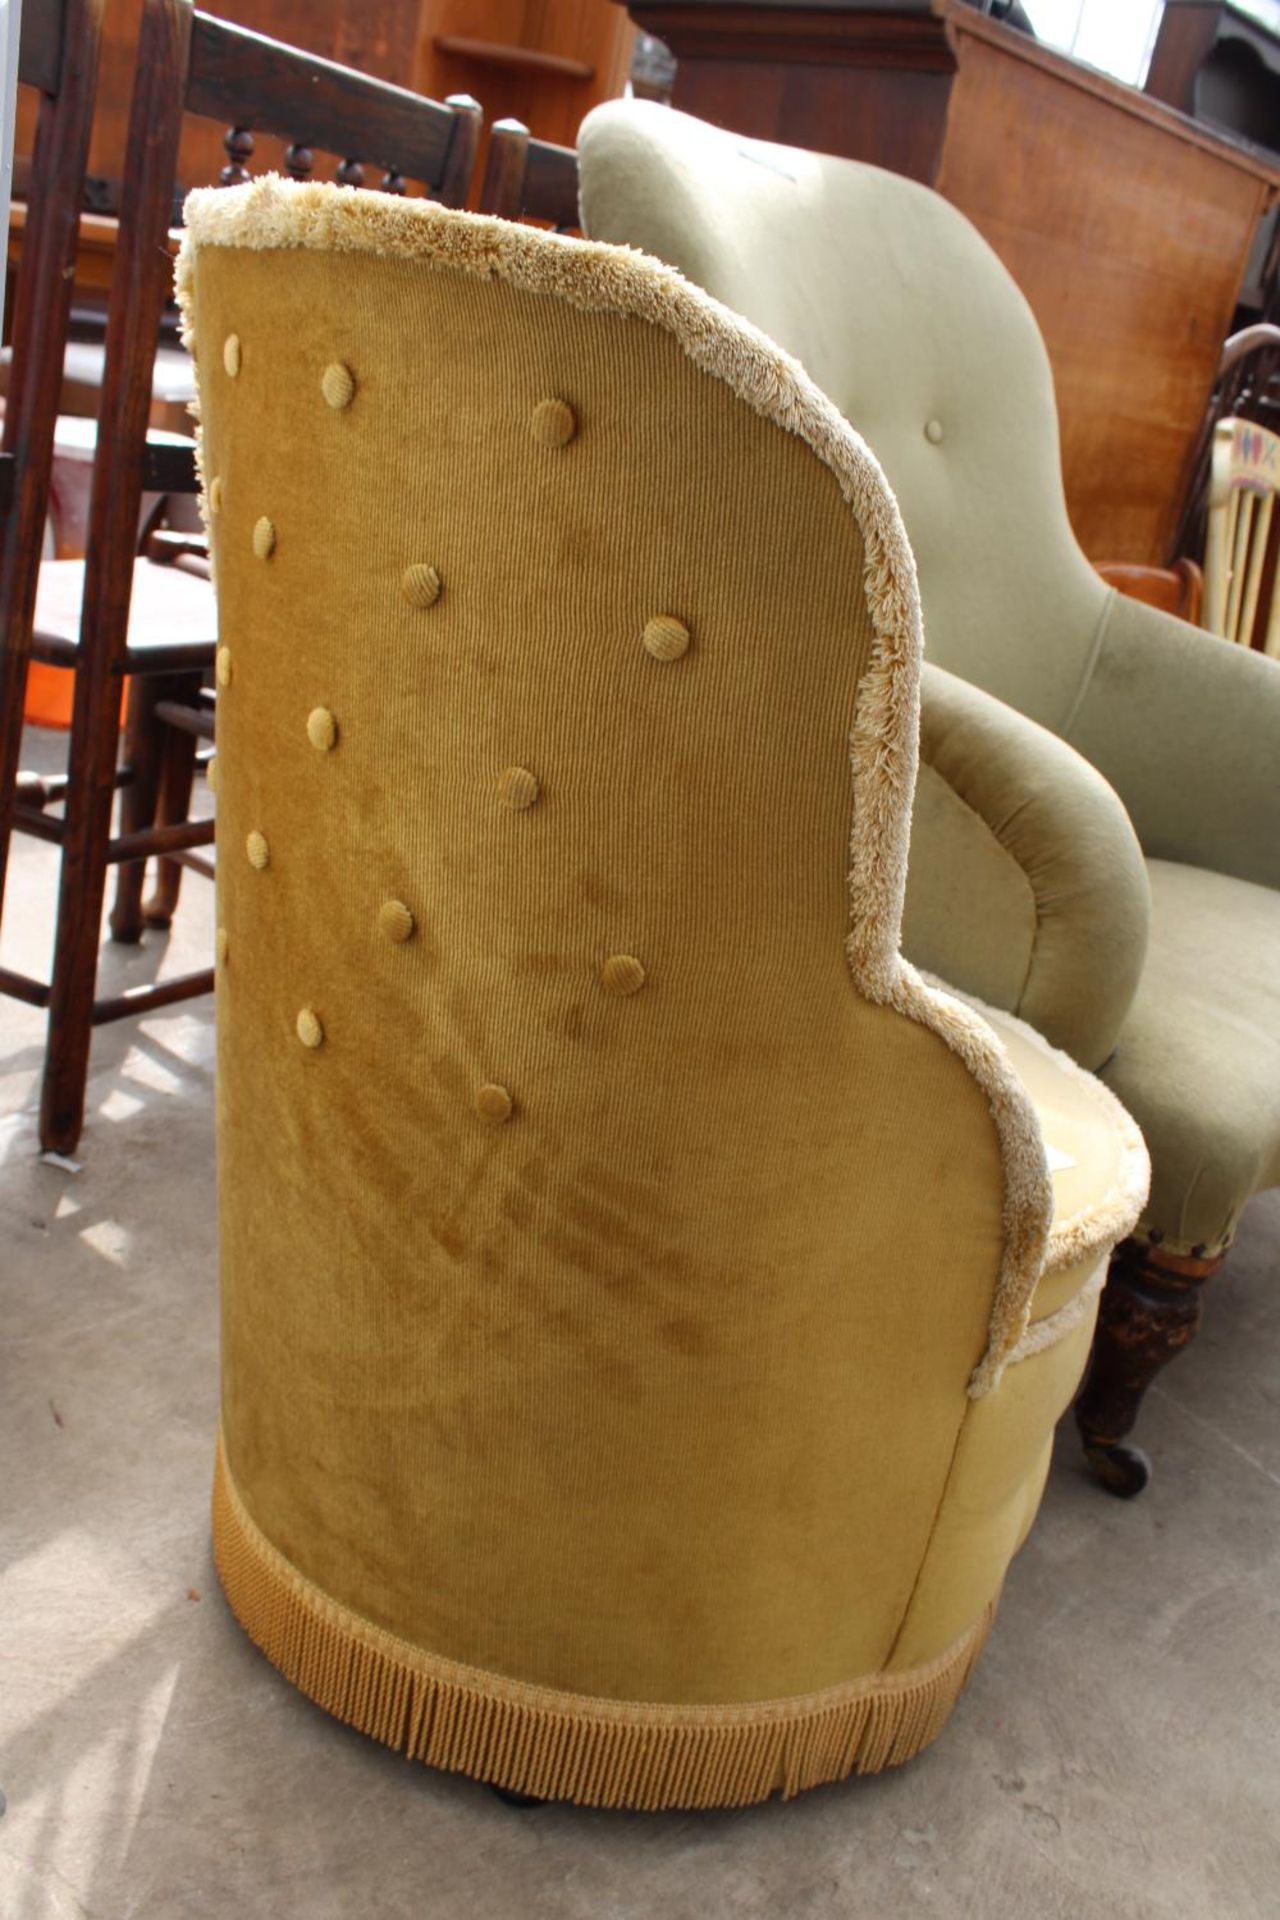 A MODERN BUTTON-BACK BEDROOM CHAIR BY SHERBORNE - Image 2 of 2